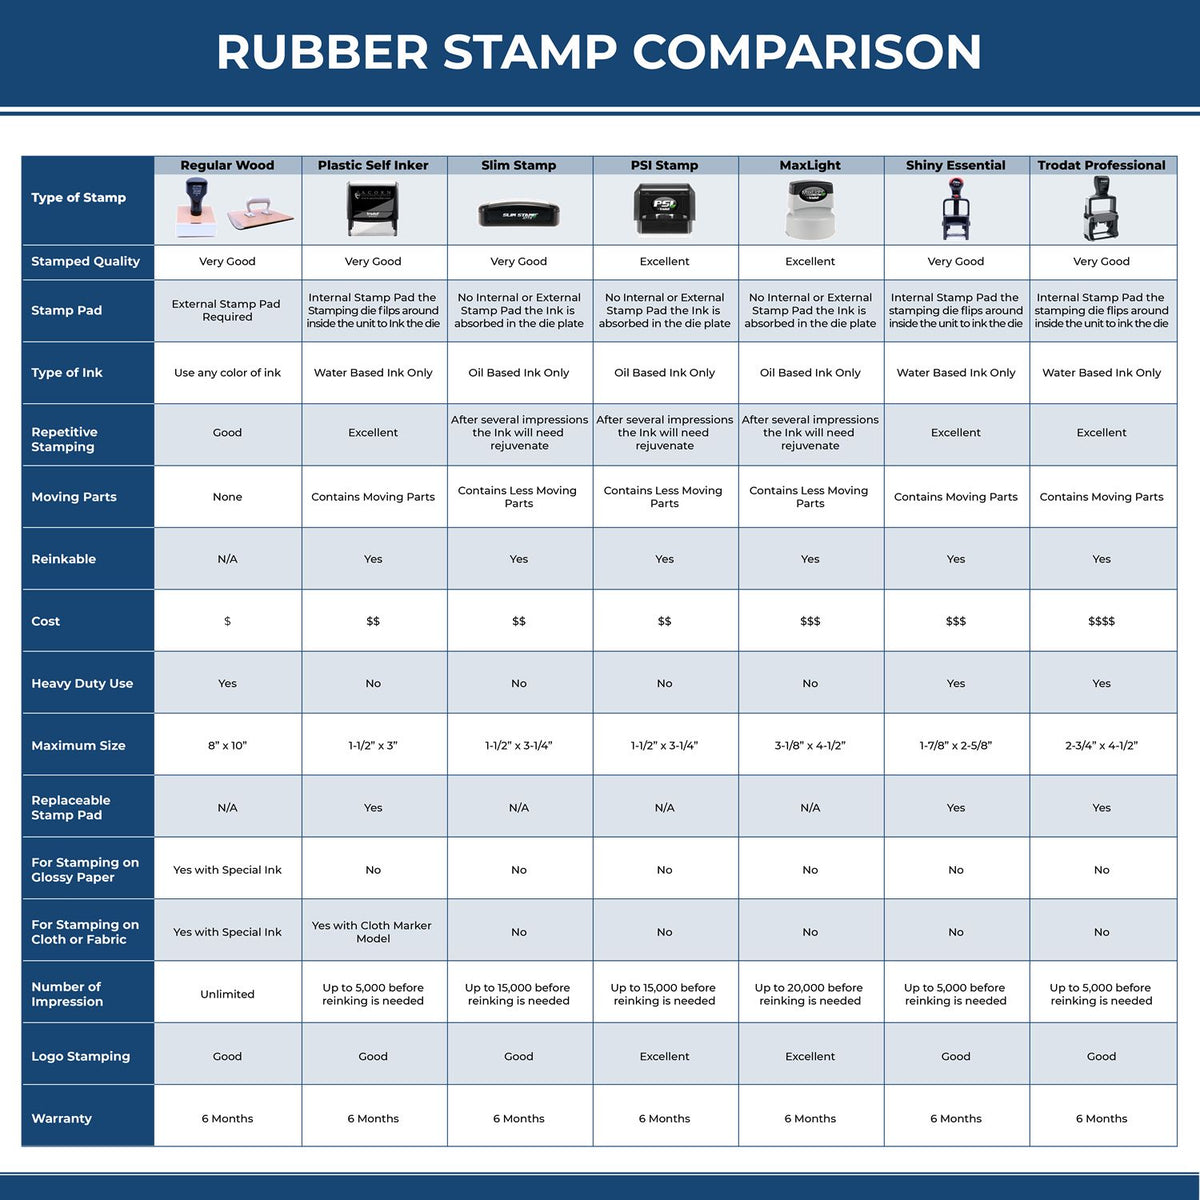 Large Pre-Inked Your Insurance has Paid their Portion Stamp 4980SLIM Rubber Stamp Comparison